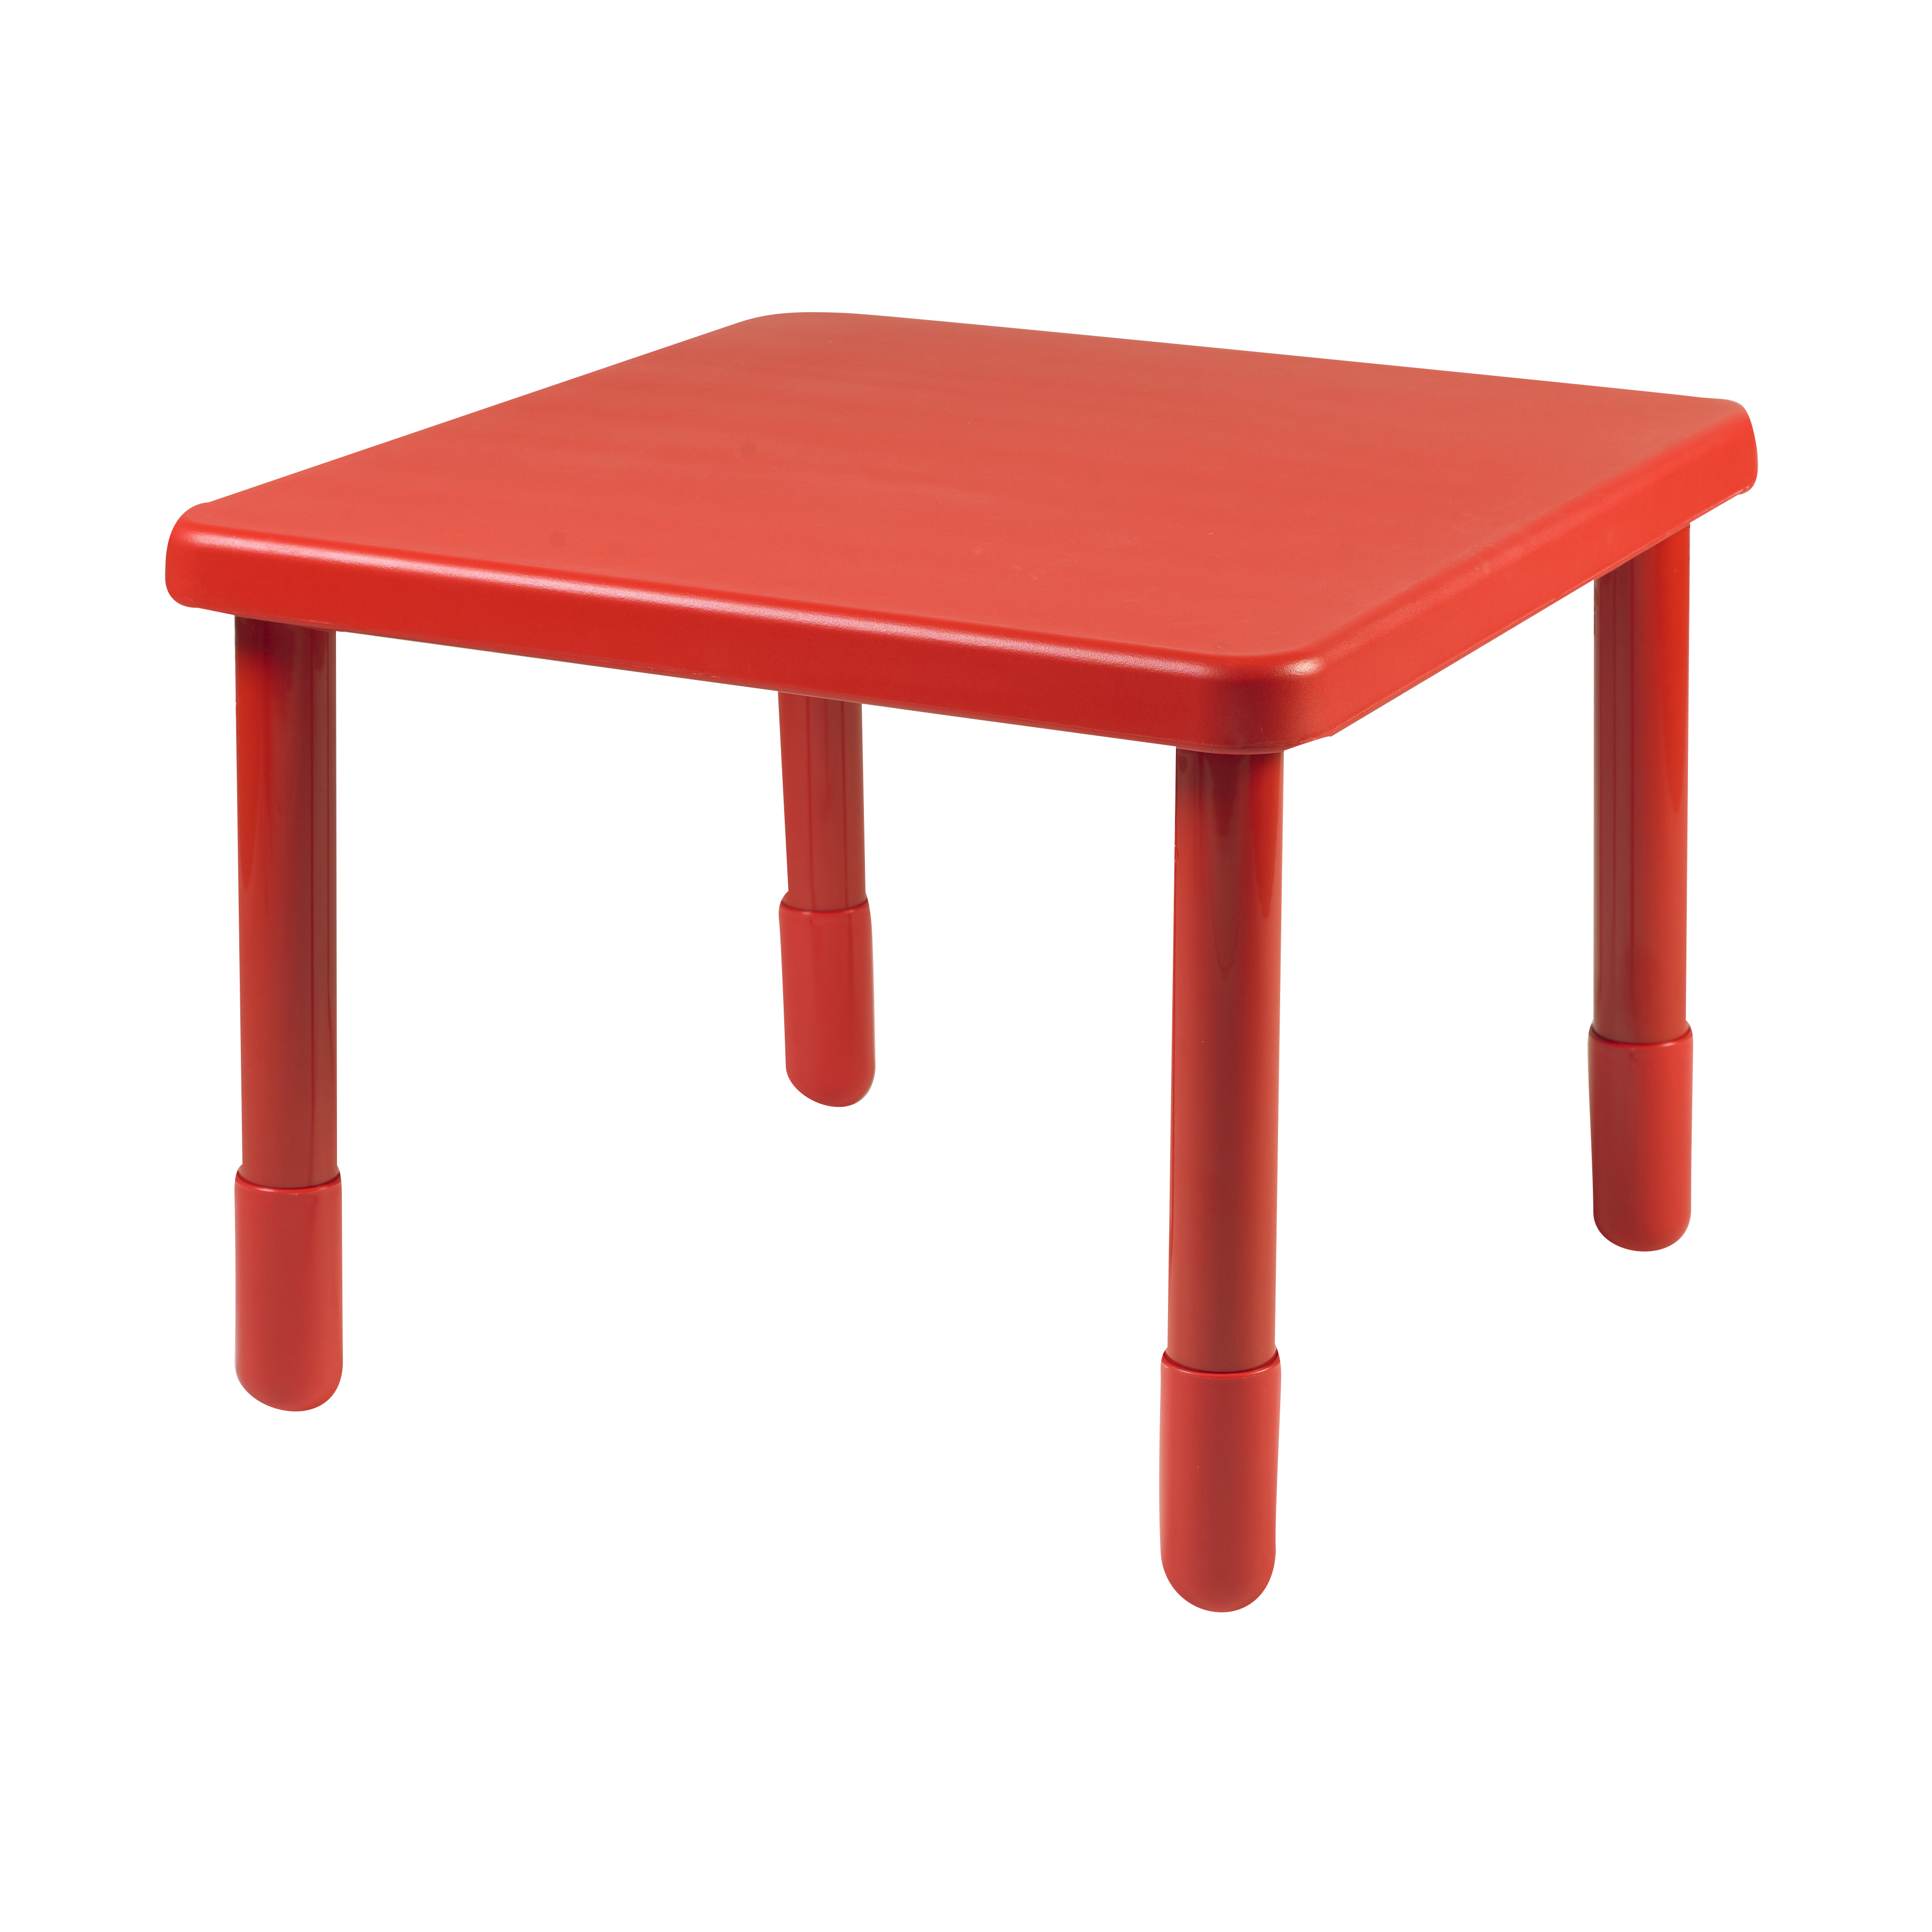 Value 71 cm  Square Table - Candy Apple Red with 51 cm  Legs